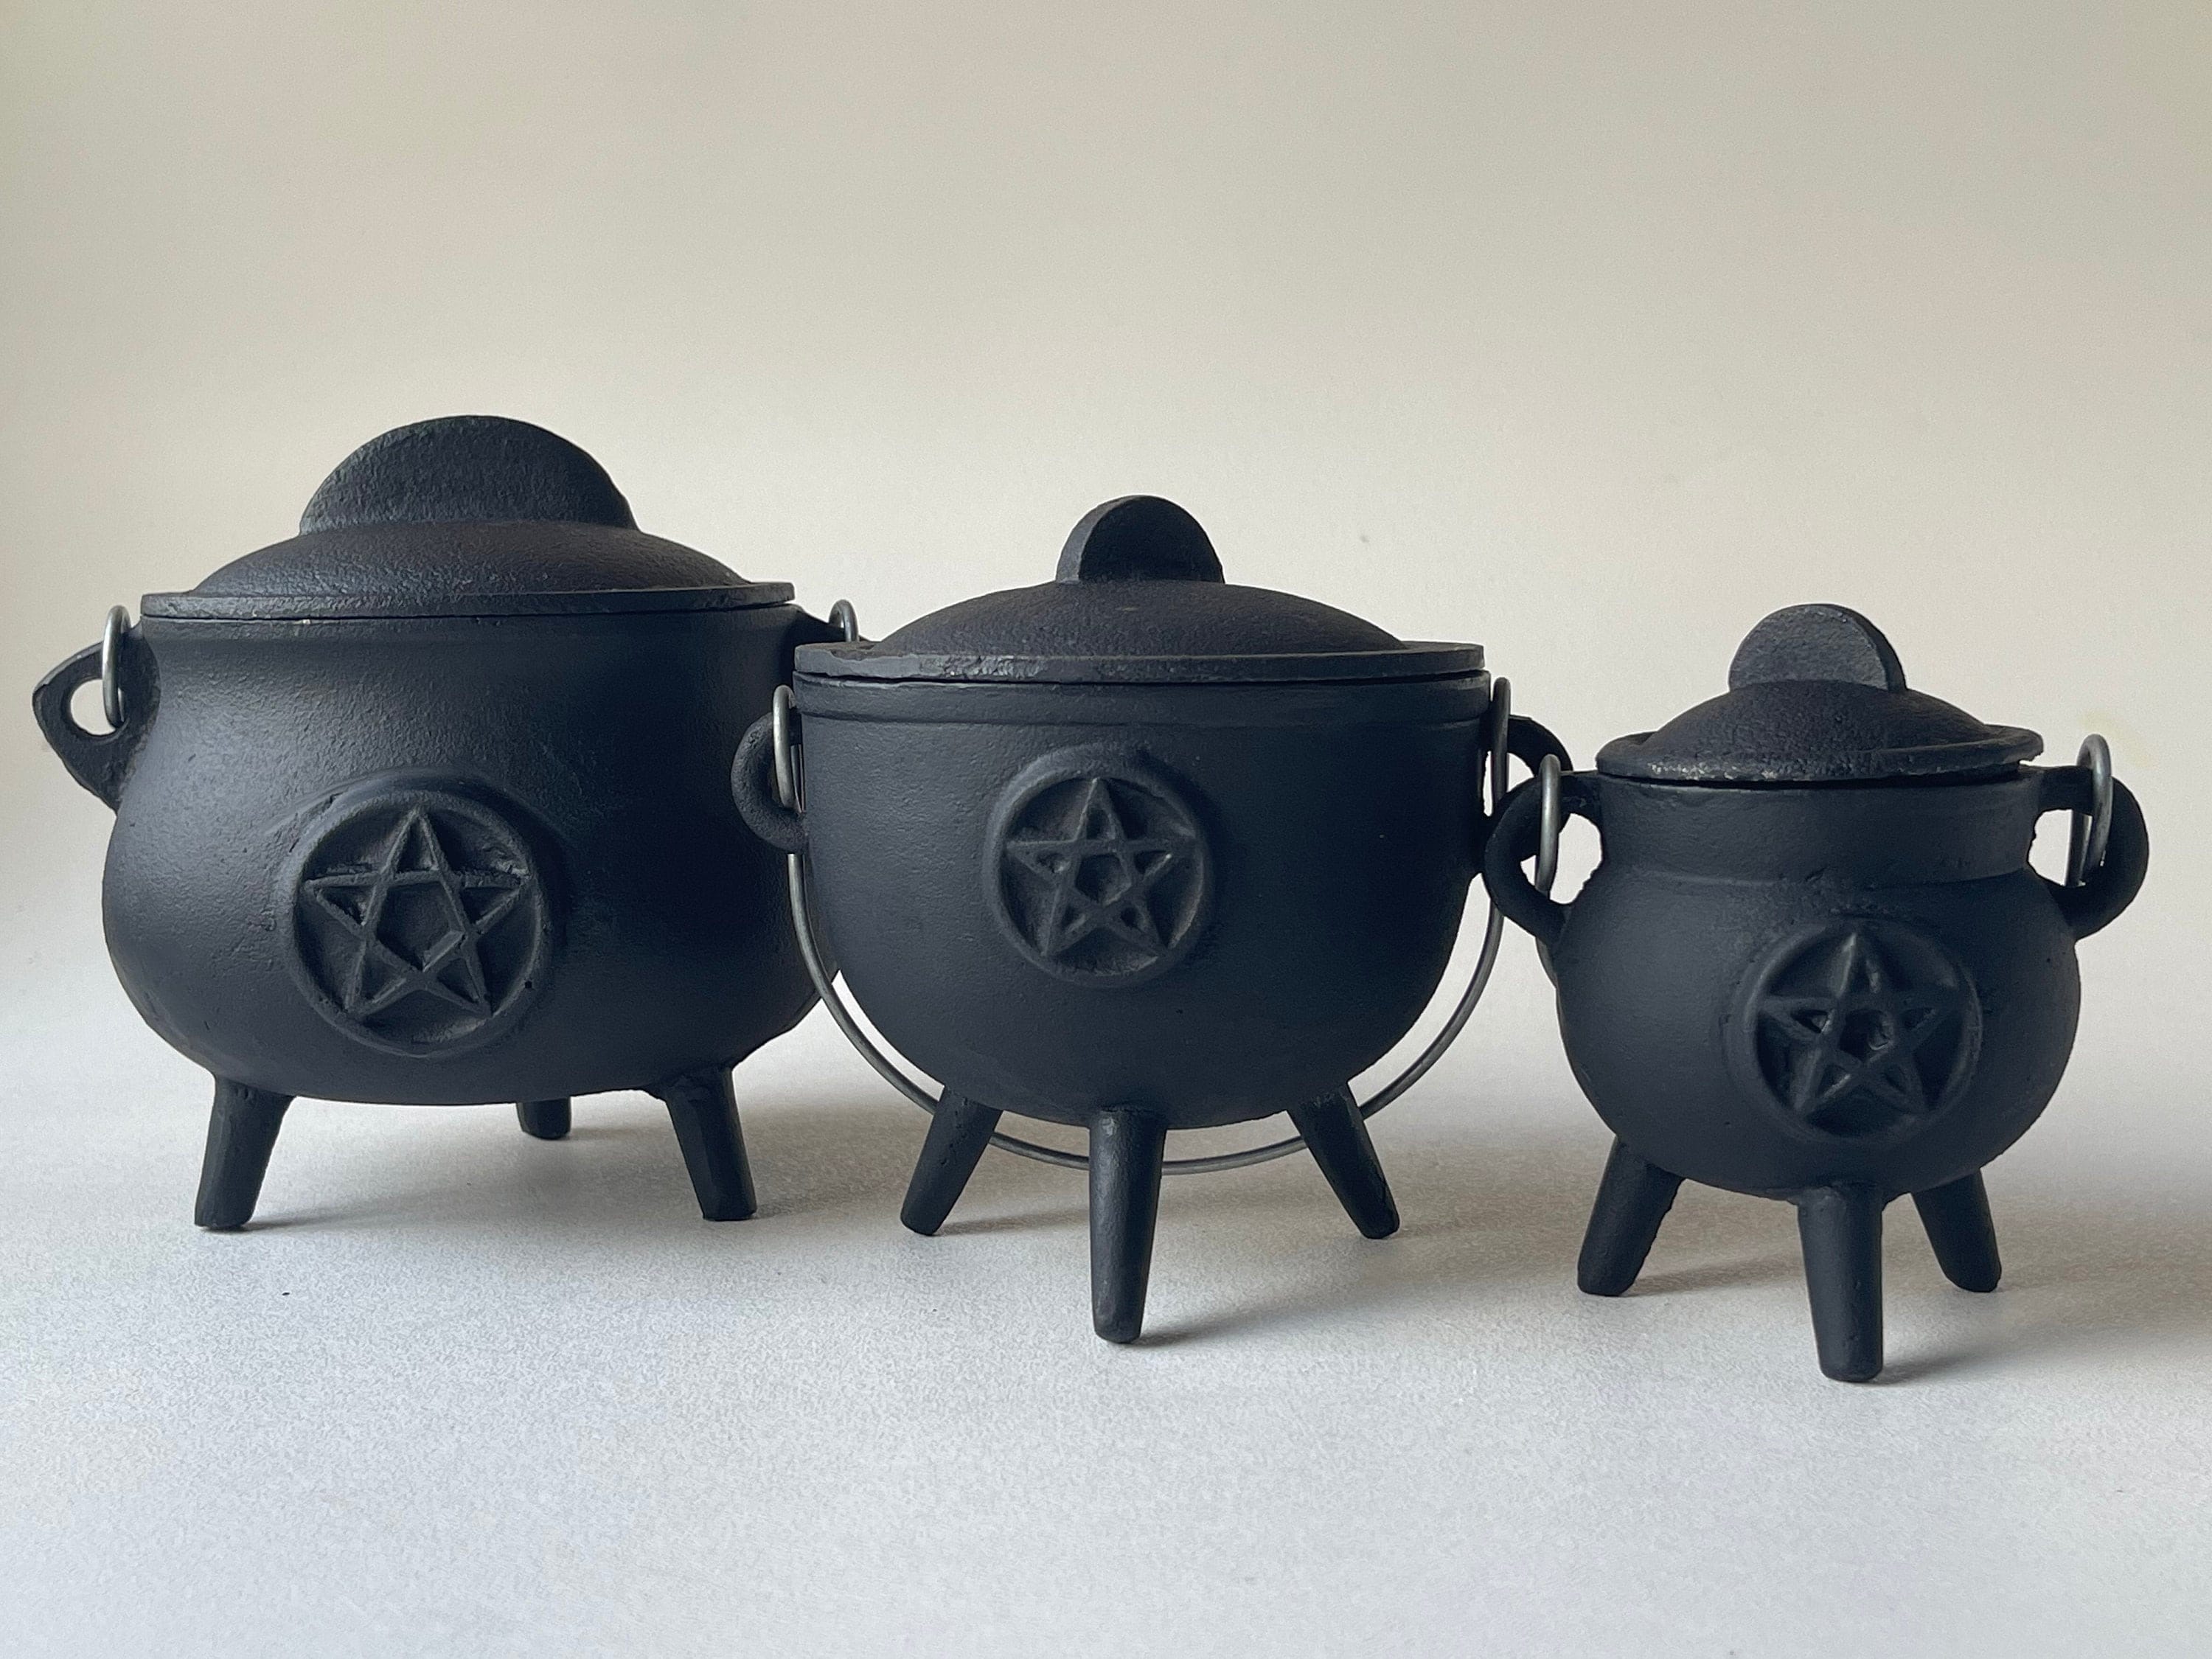 Large Cast Iron Cauldron - Candle Holder and Wax Warmer Ideal for Smudging  Witchcraft Incense Burning Halloween